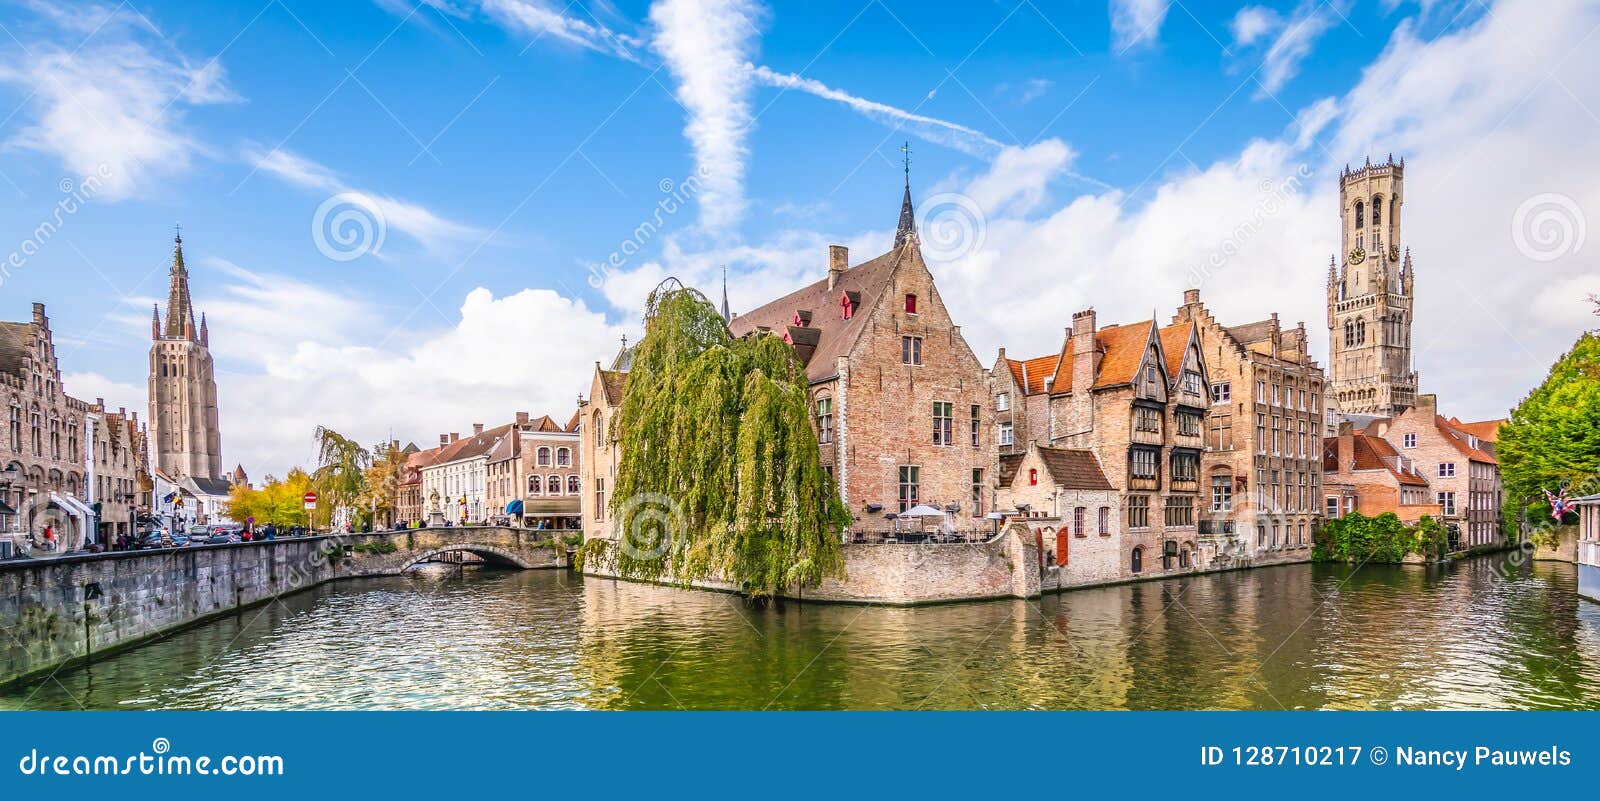 panoramic city view belfry tower and famous canal in bruges, belgium.